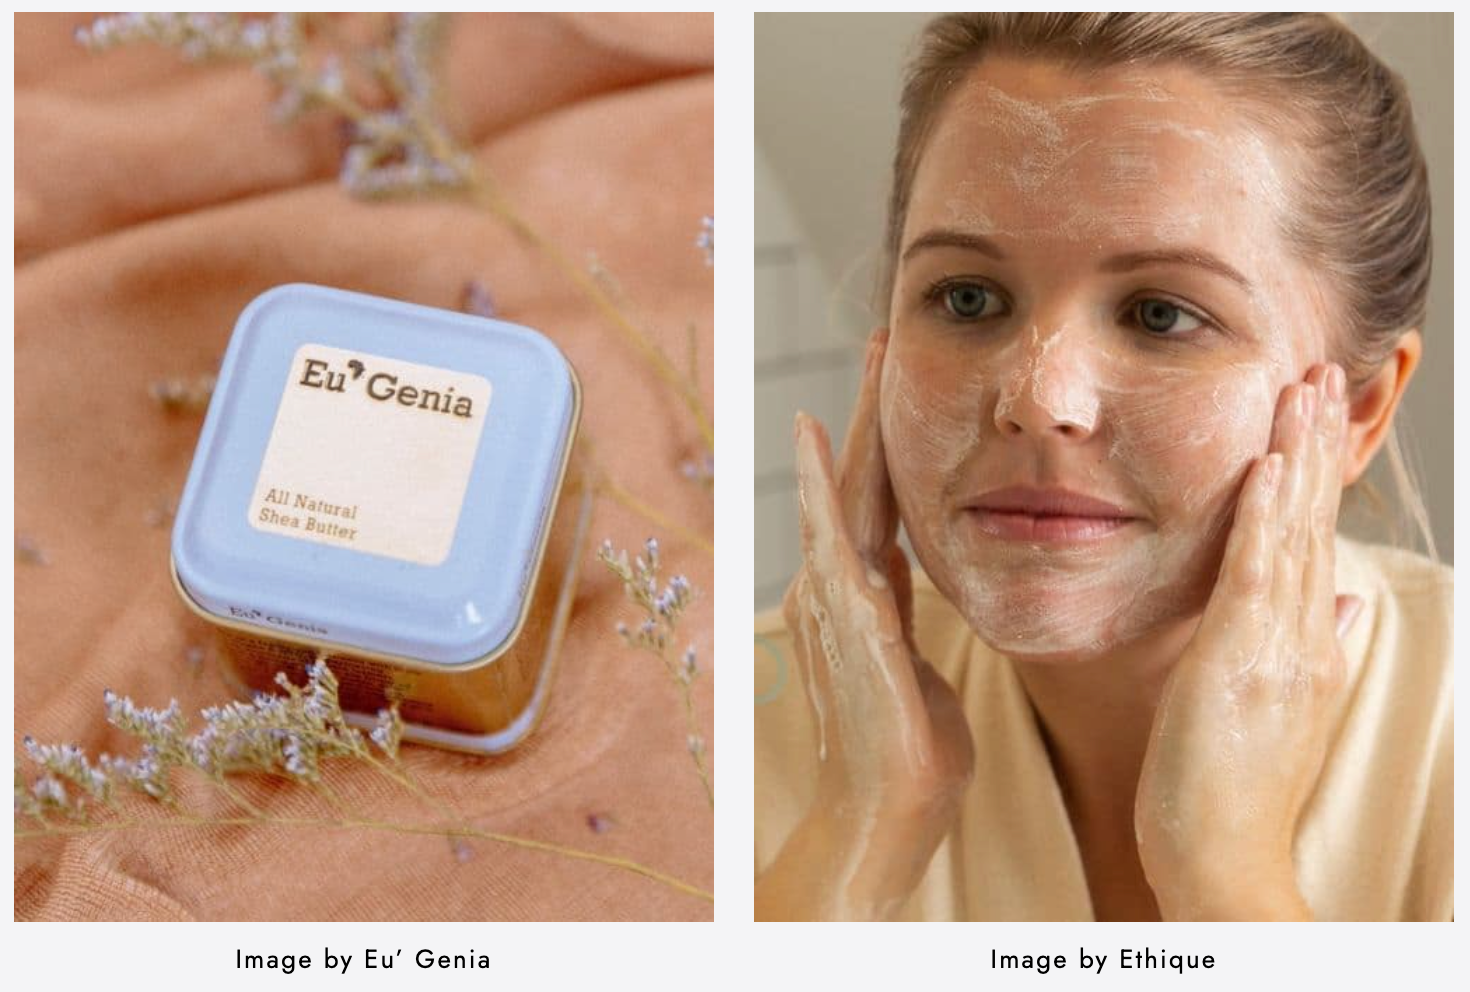 Sustainable Jungle Article Preview with a tin of shea butter on the left and a woman washing her face on the right.